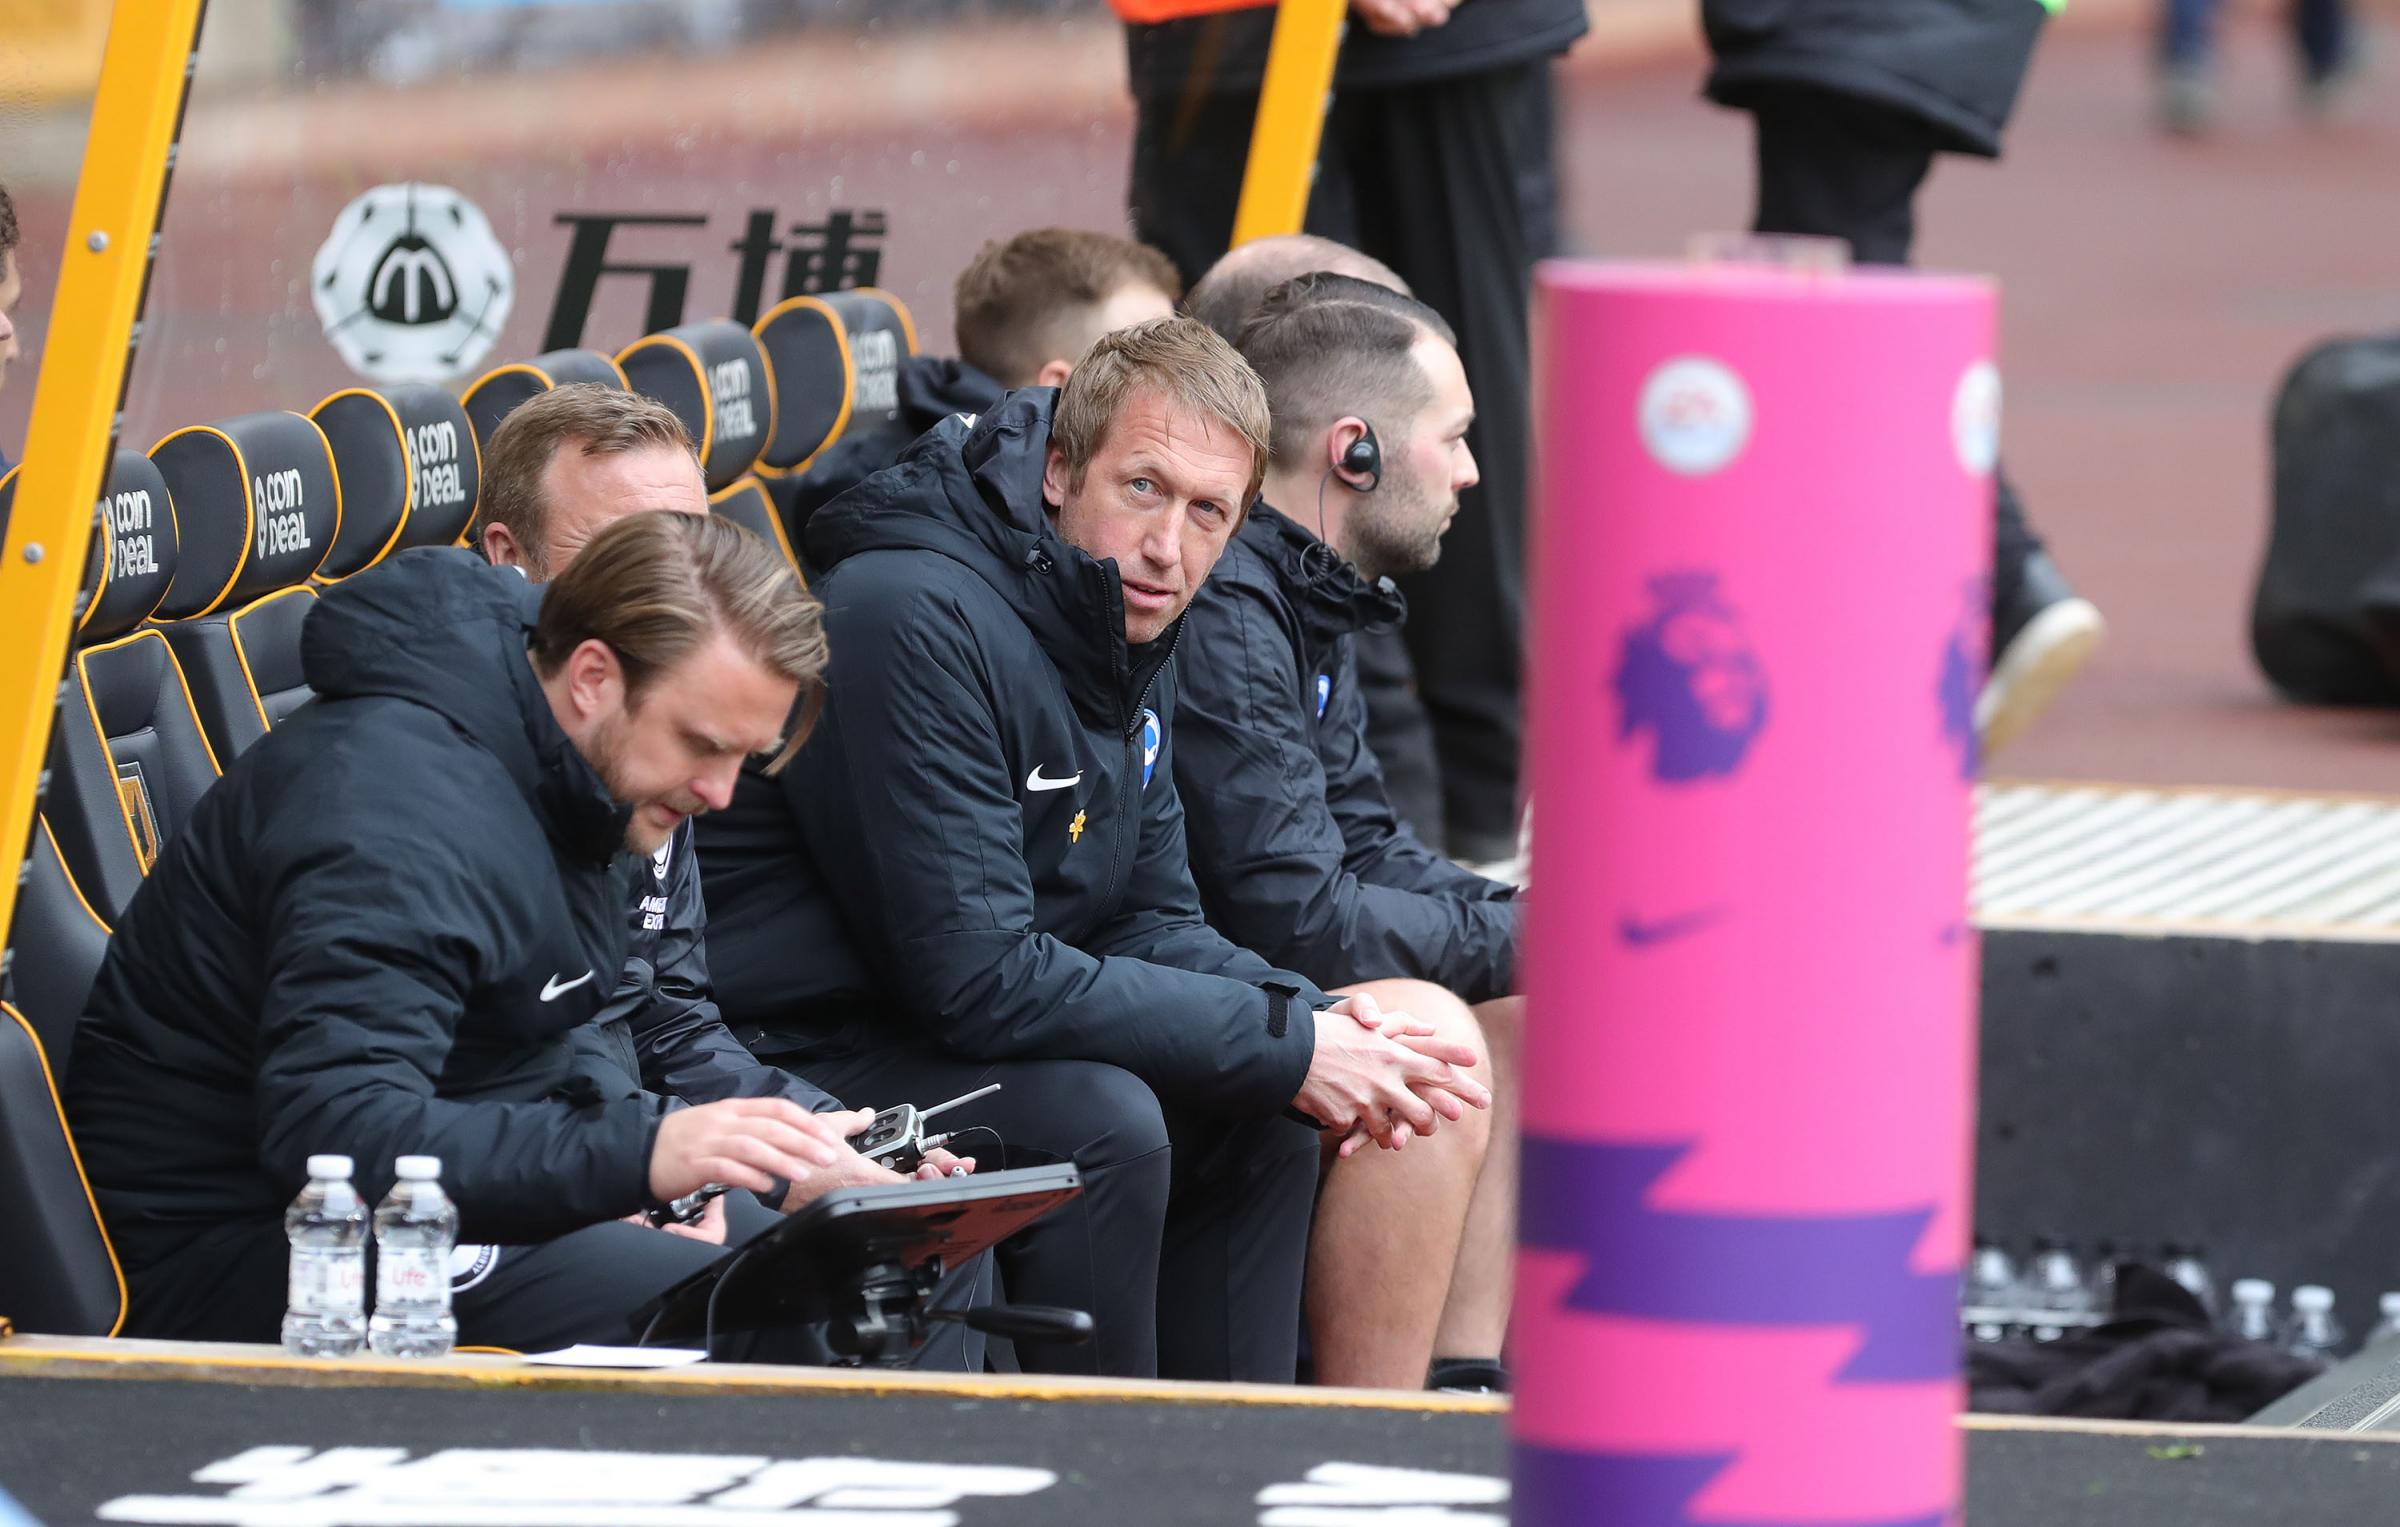 It's a good start but long way to go this season, reveals Graham Potter